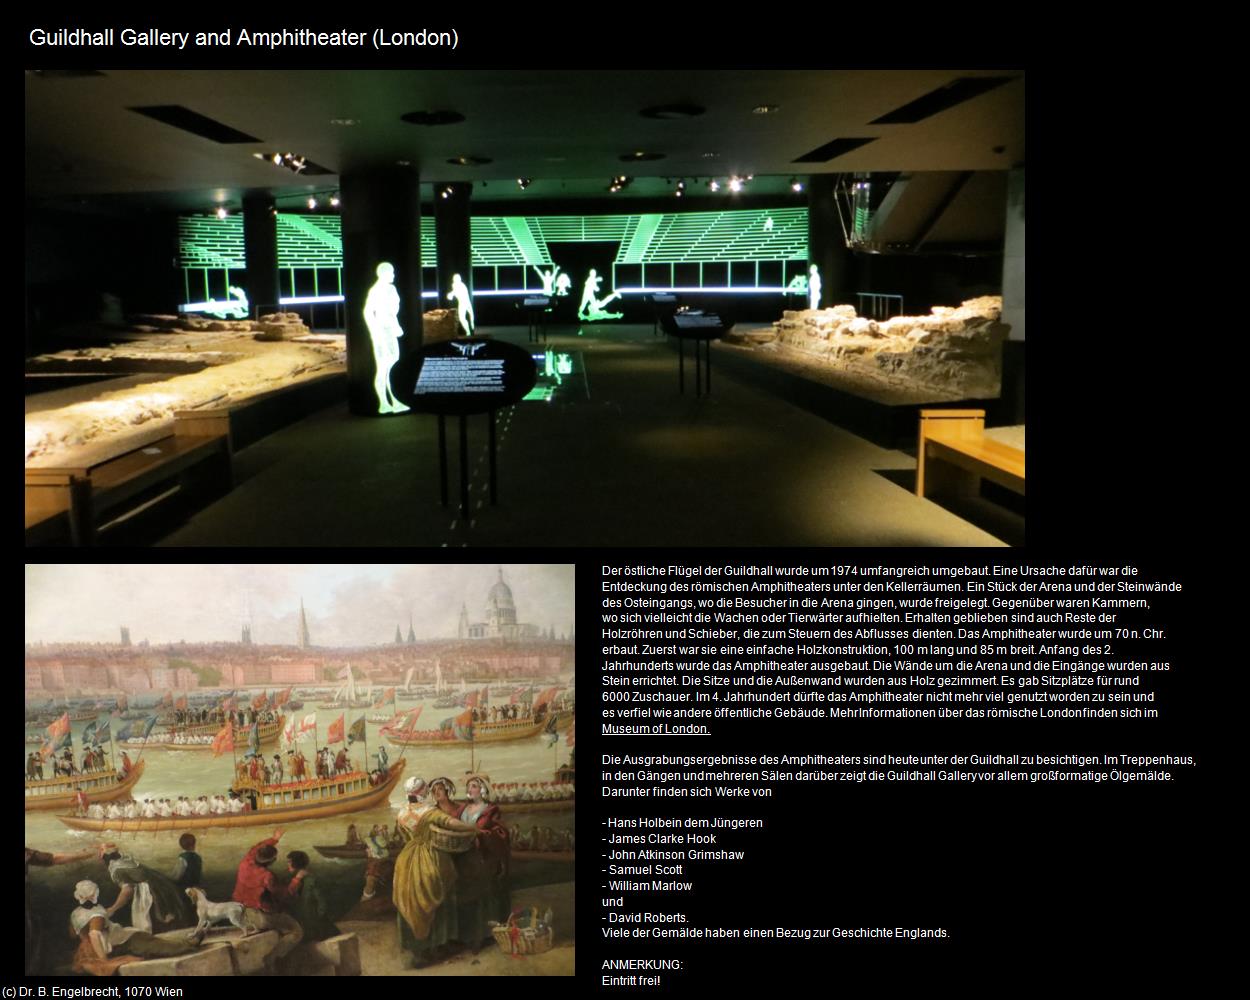 Guildhall Gallery and Amphitheater (London, England) in Kulturatlas-ENGLAND und WALES(c)B.Engelbrecht